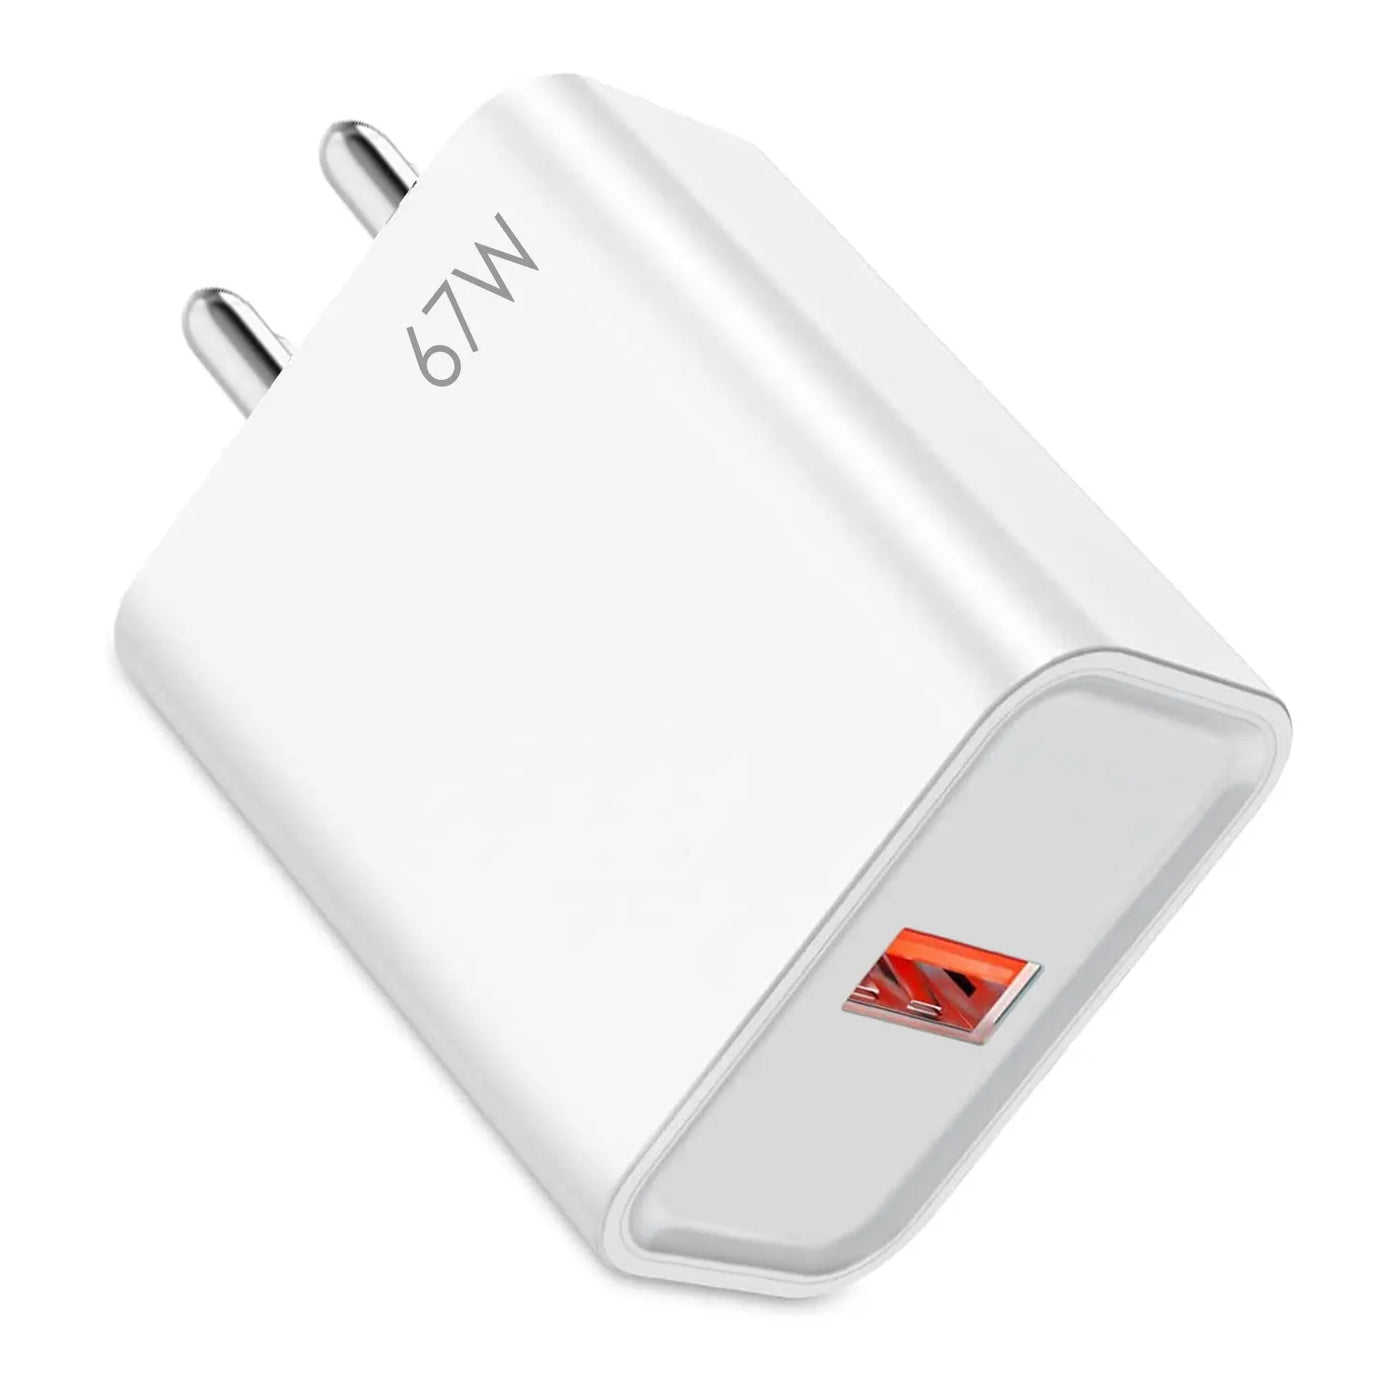 Muvit 67W SonicCharge 3.0 Charger Adapter for Xiaomi Phones